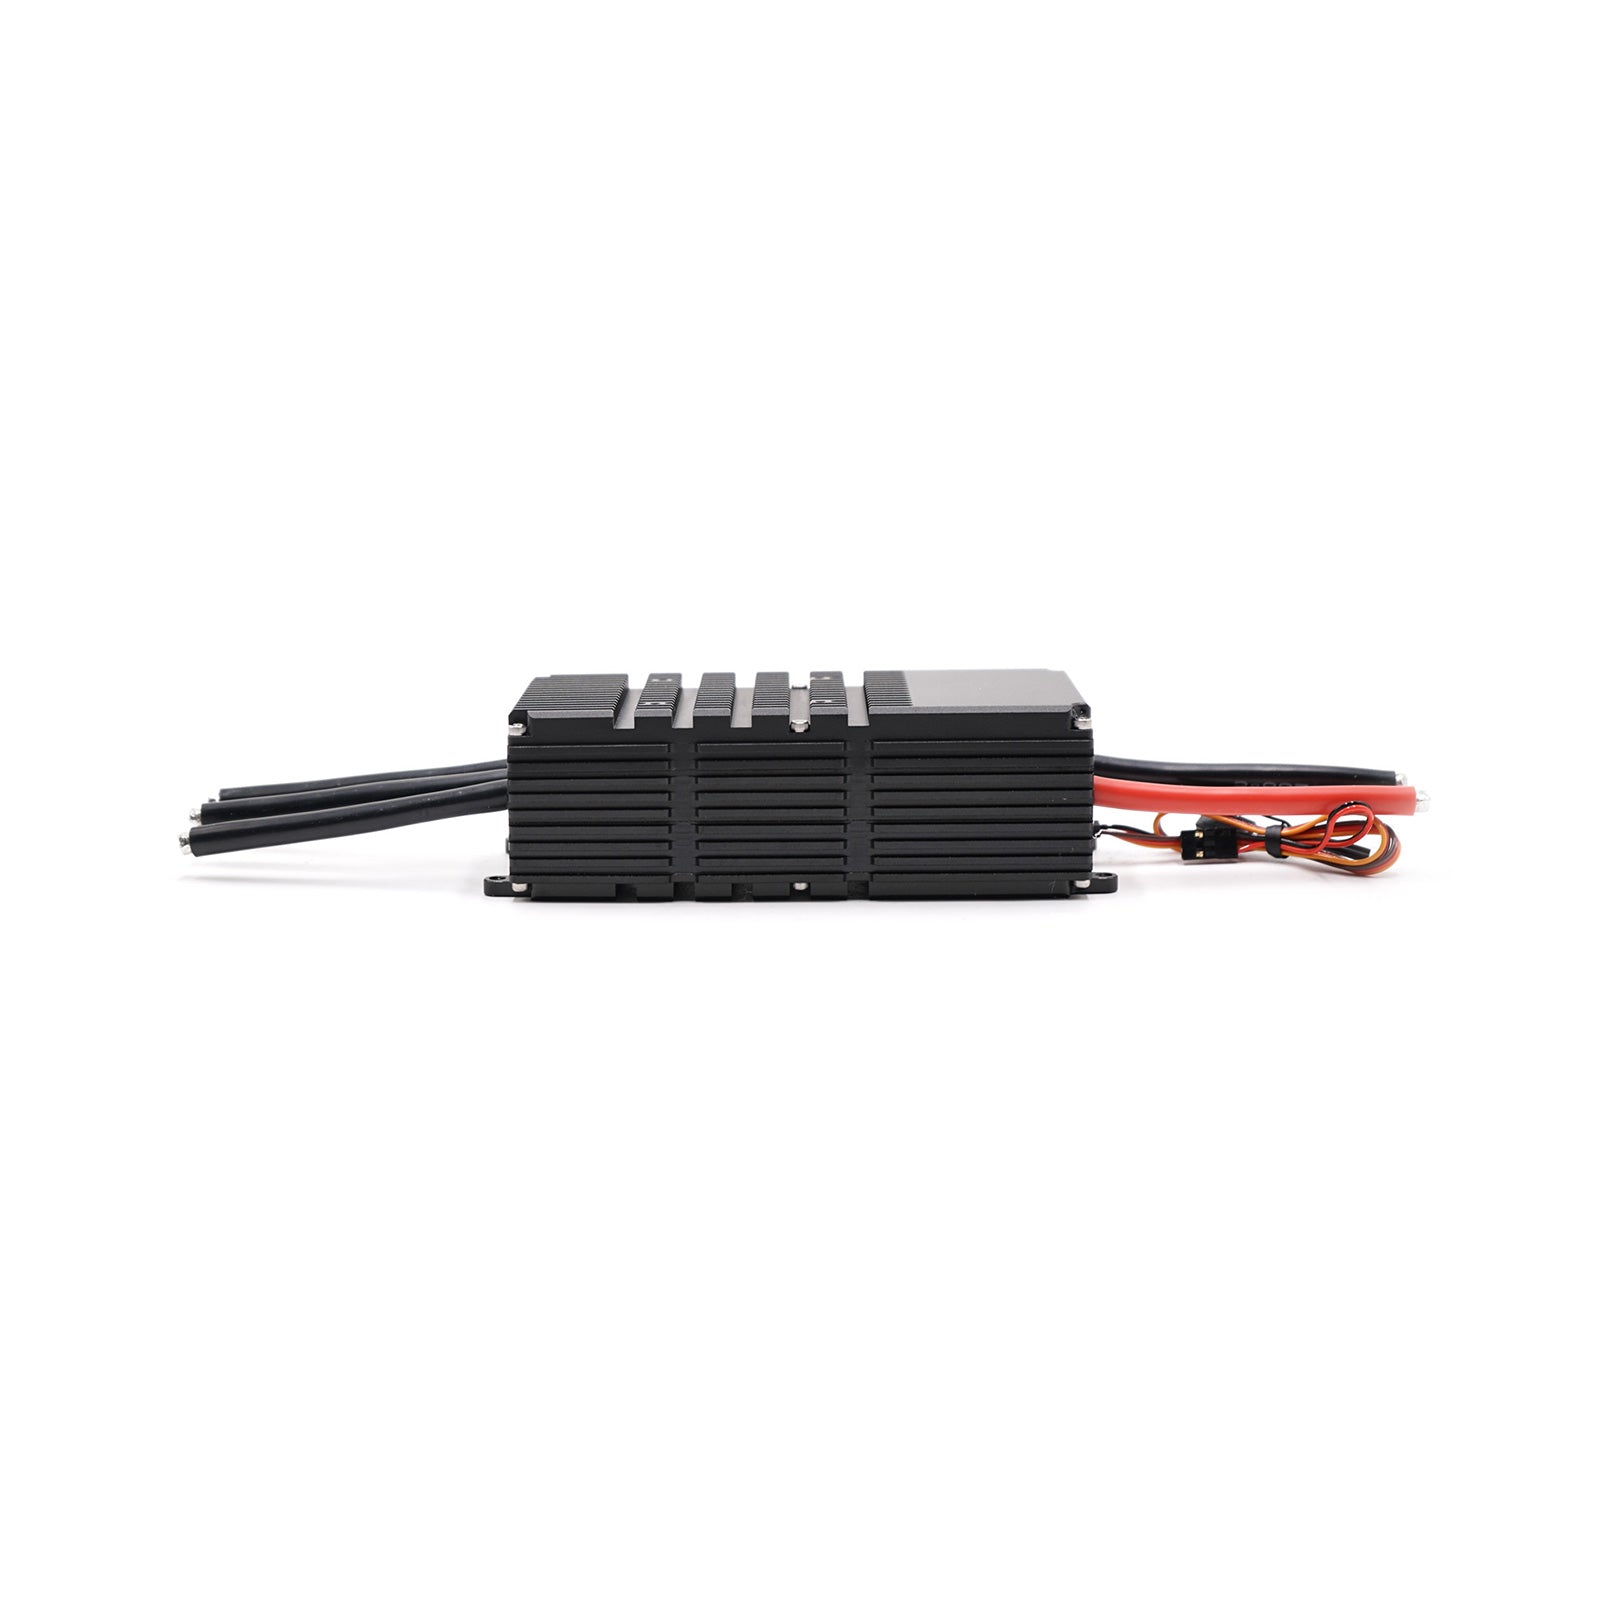 Furious Motor 24S 300A High Current Motor Controller with Upgraded Algorithm for Big Drone Engine